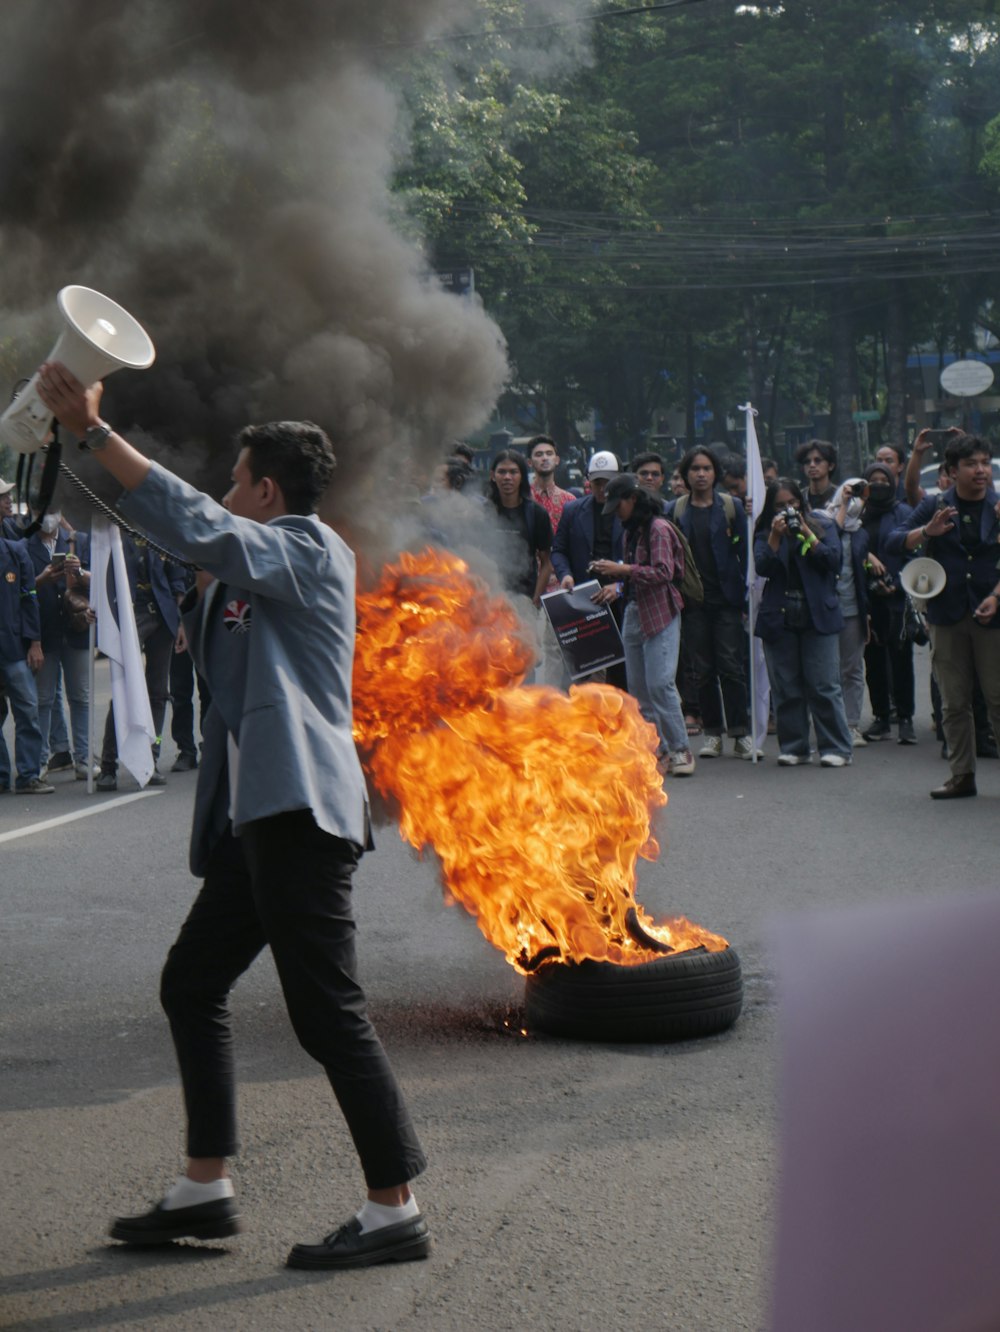 a man holding a white object with flames and a group of people watching